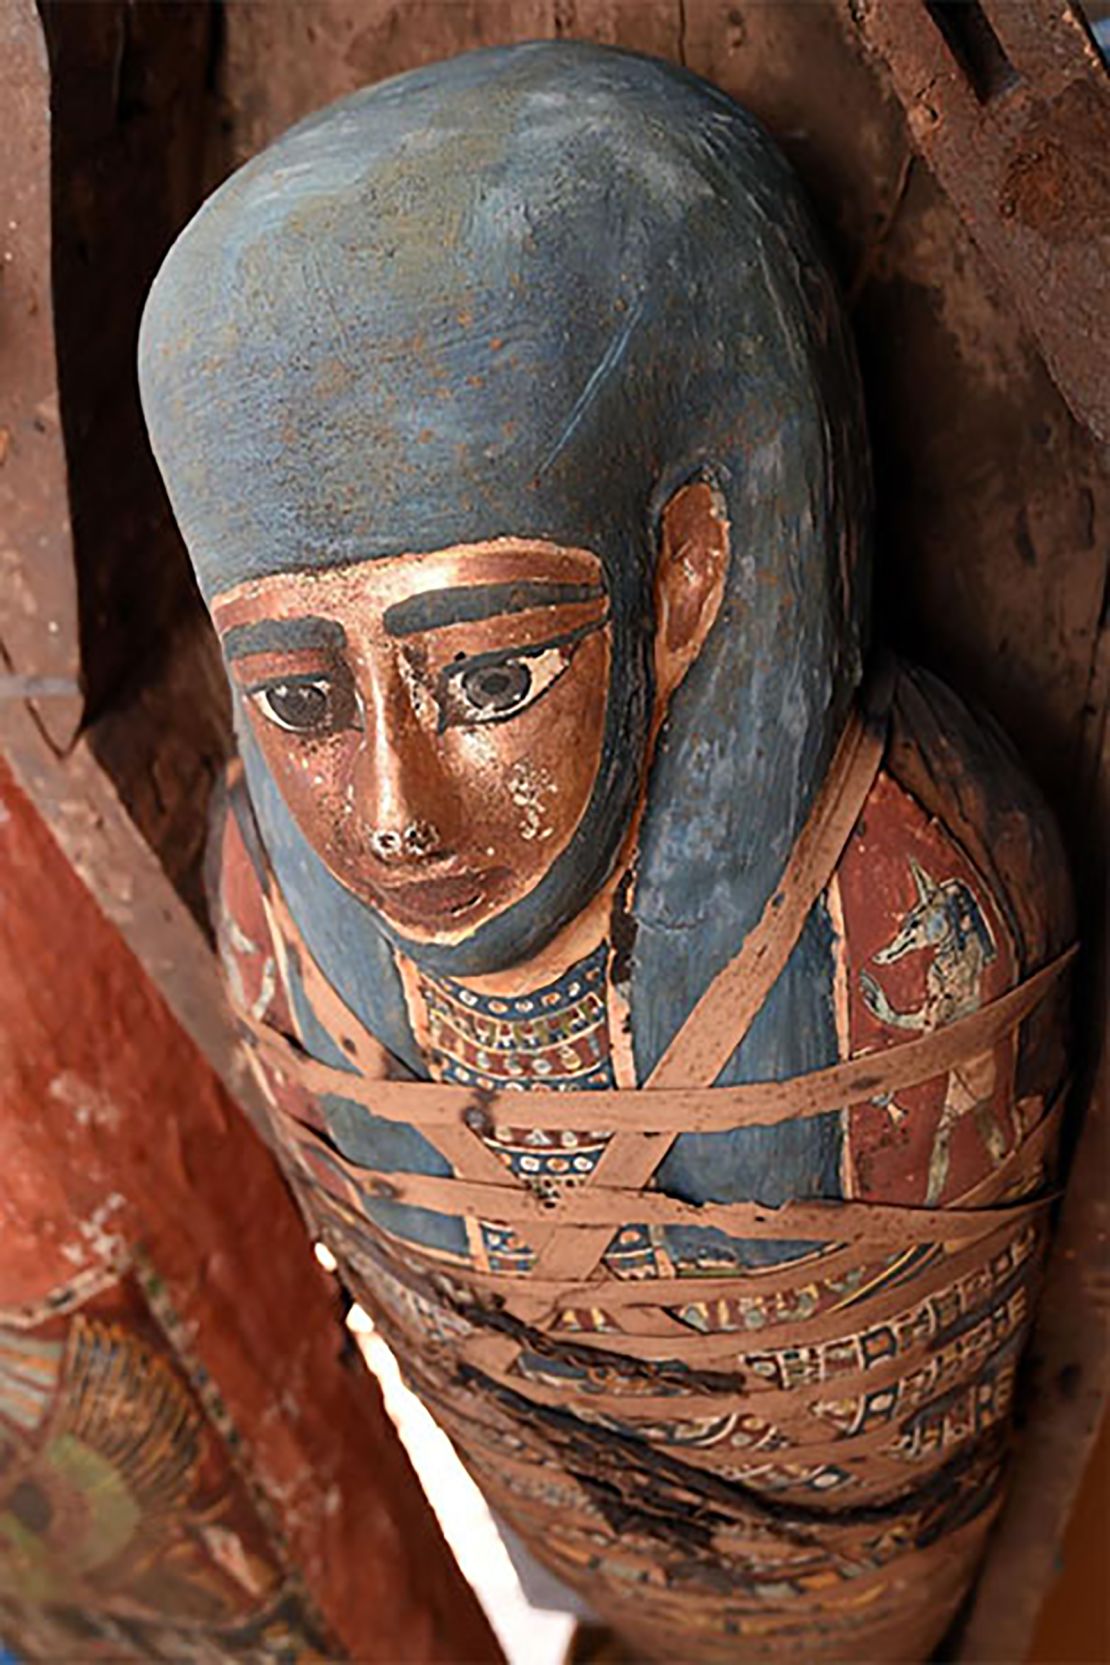 The collection of sarcophagi, announced on Monday, is believed to date back more than 2,500 years.